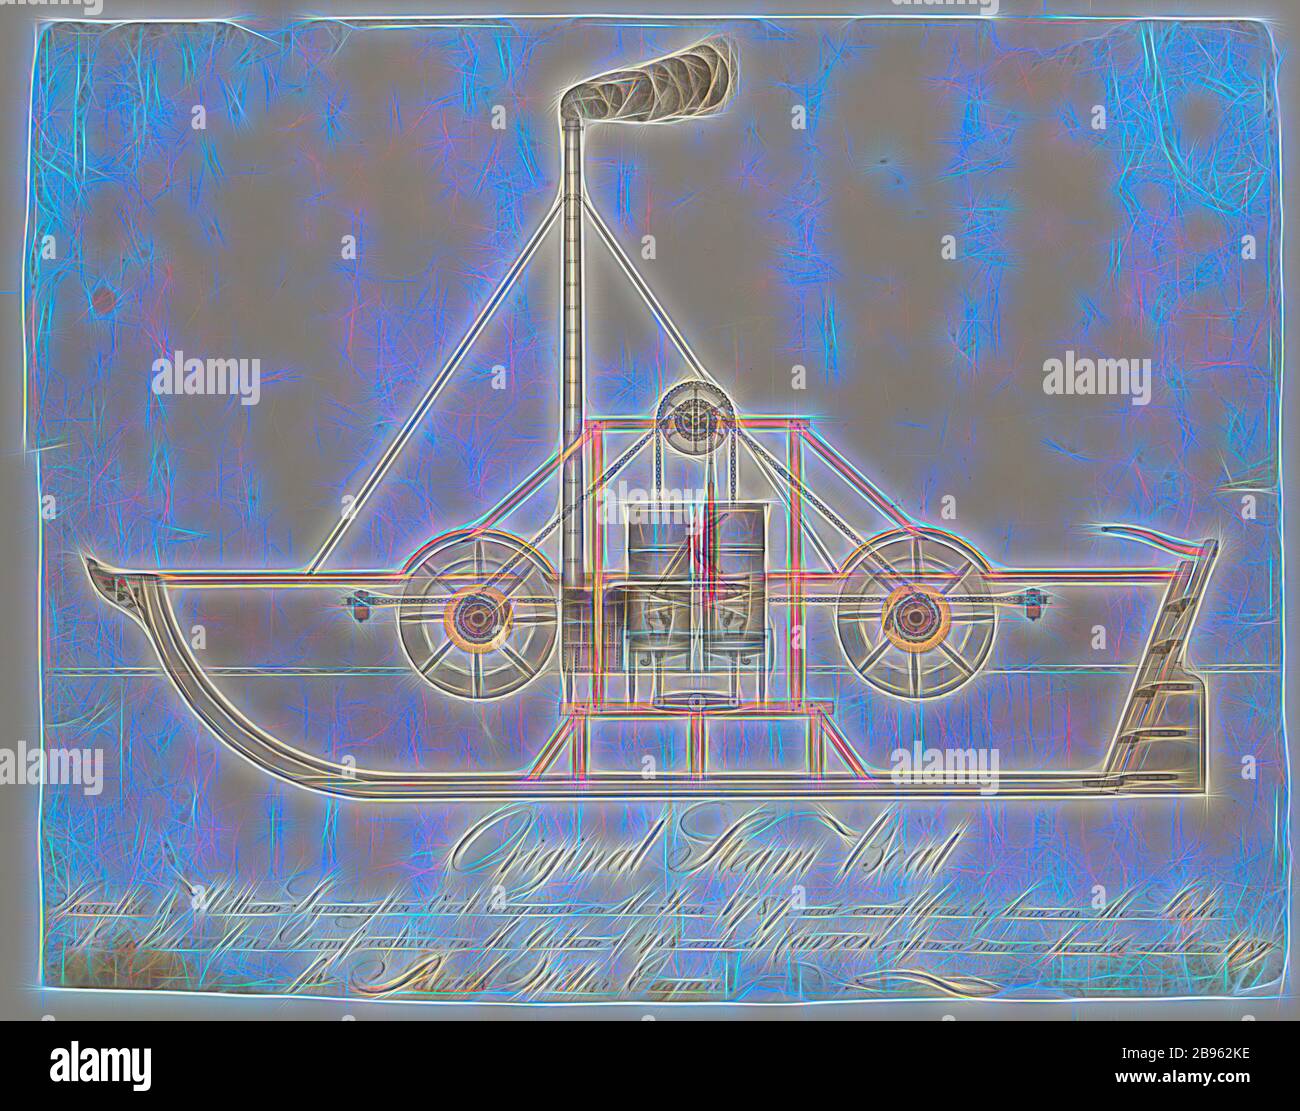 Engineering Drawing - William Symington, Original Steam Boat for Patrick Miller Esq, 1787-1788, Ink and water-colour technical drawing showing a longitudinal cross-sectional elevation of the first paddlesteamer built by the Scottish engineer and inventor, William Symington, C.E., with assistance from James Taylor and others, in 1787-88. The vessel depicted is an experimental steam-powered paddleboat built for Patrick Miller Esq., a prominent Edinburgh merchant and banker. Late in 1787,, Reimagined by Gibon, design of warm cheerful glowing of brightness and light rays radiance. Classic art rein Stock Photo